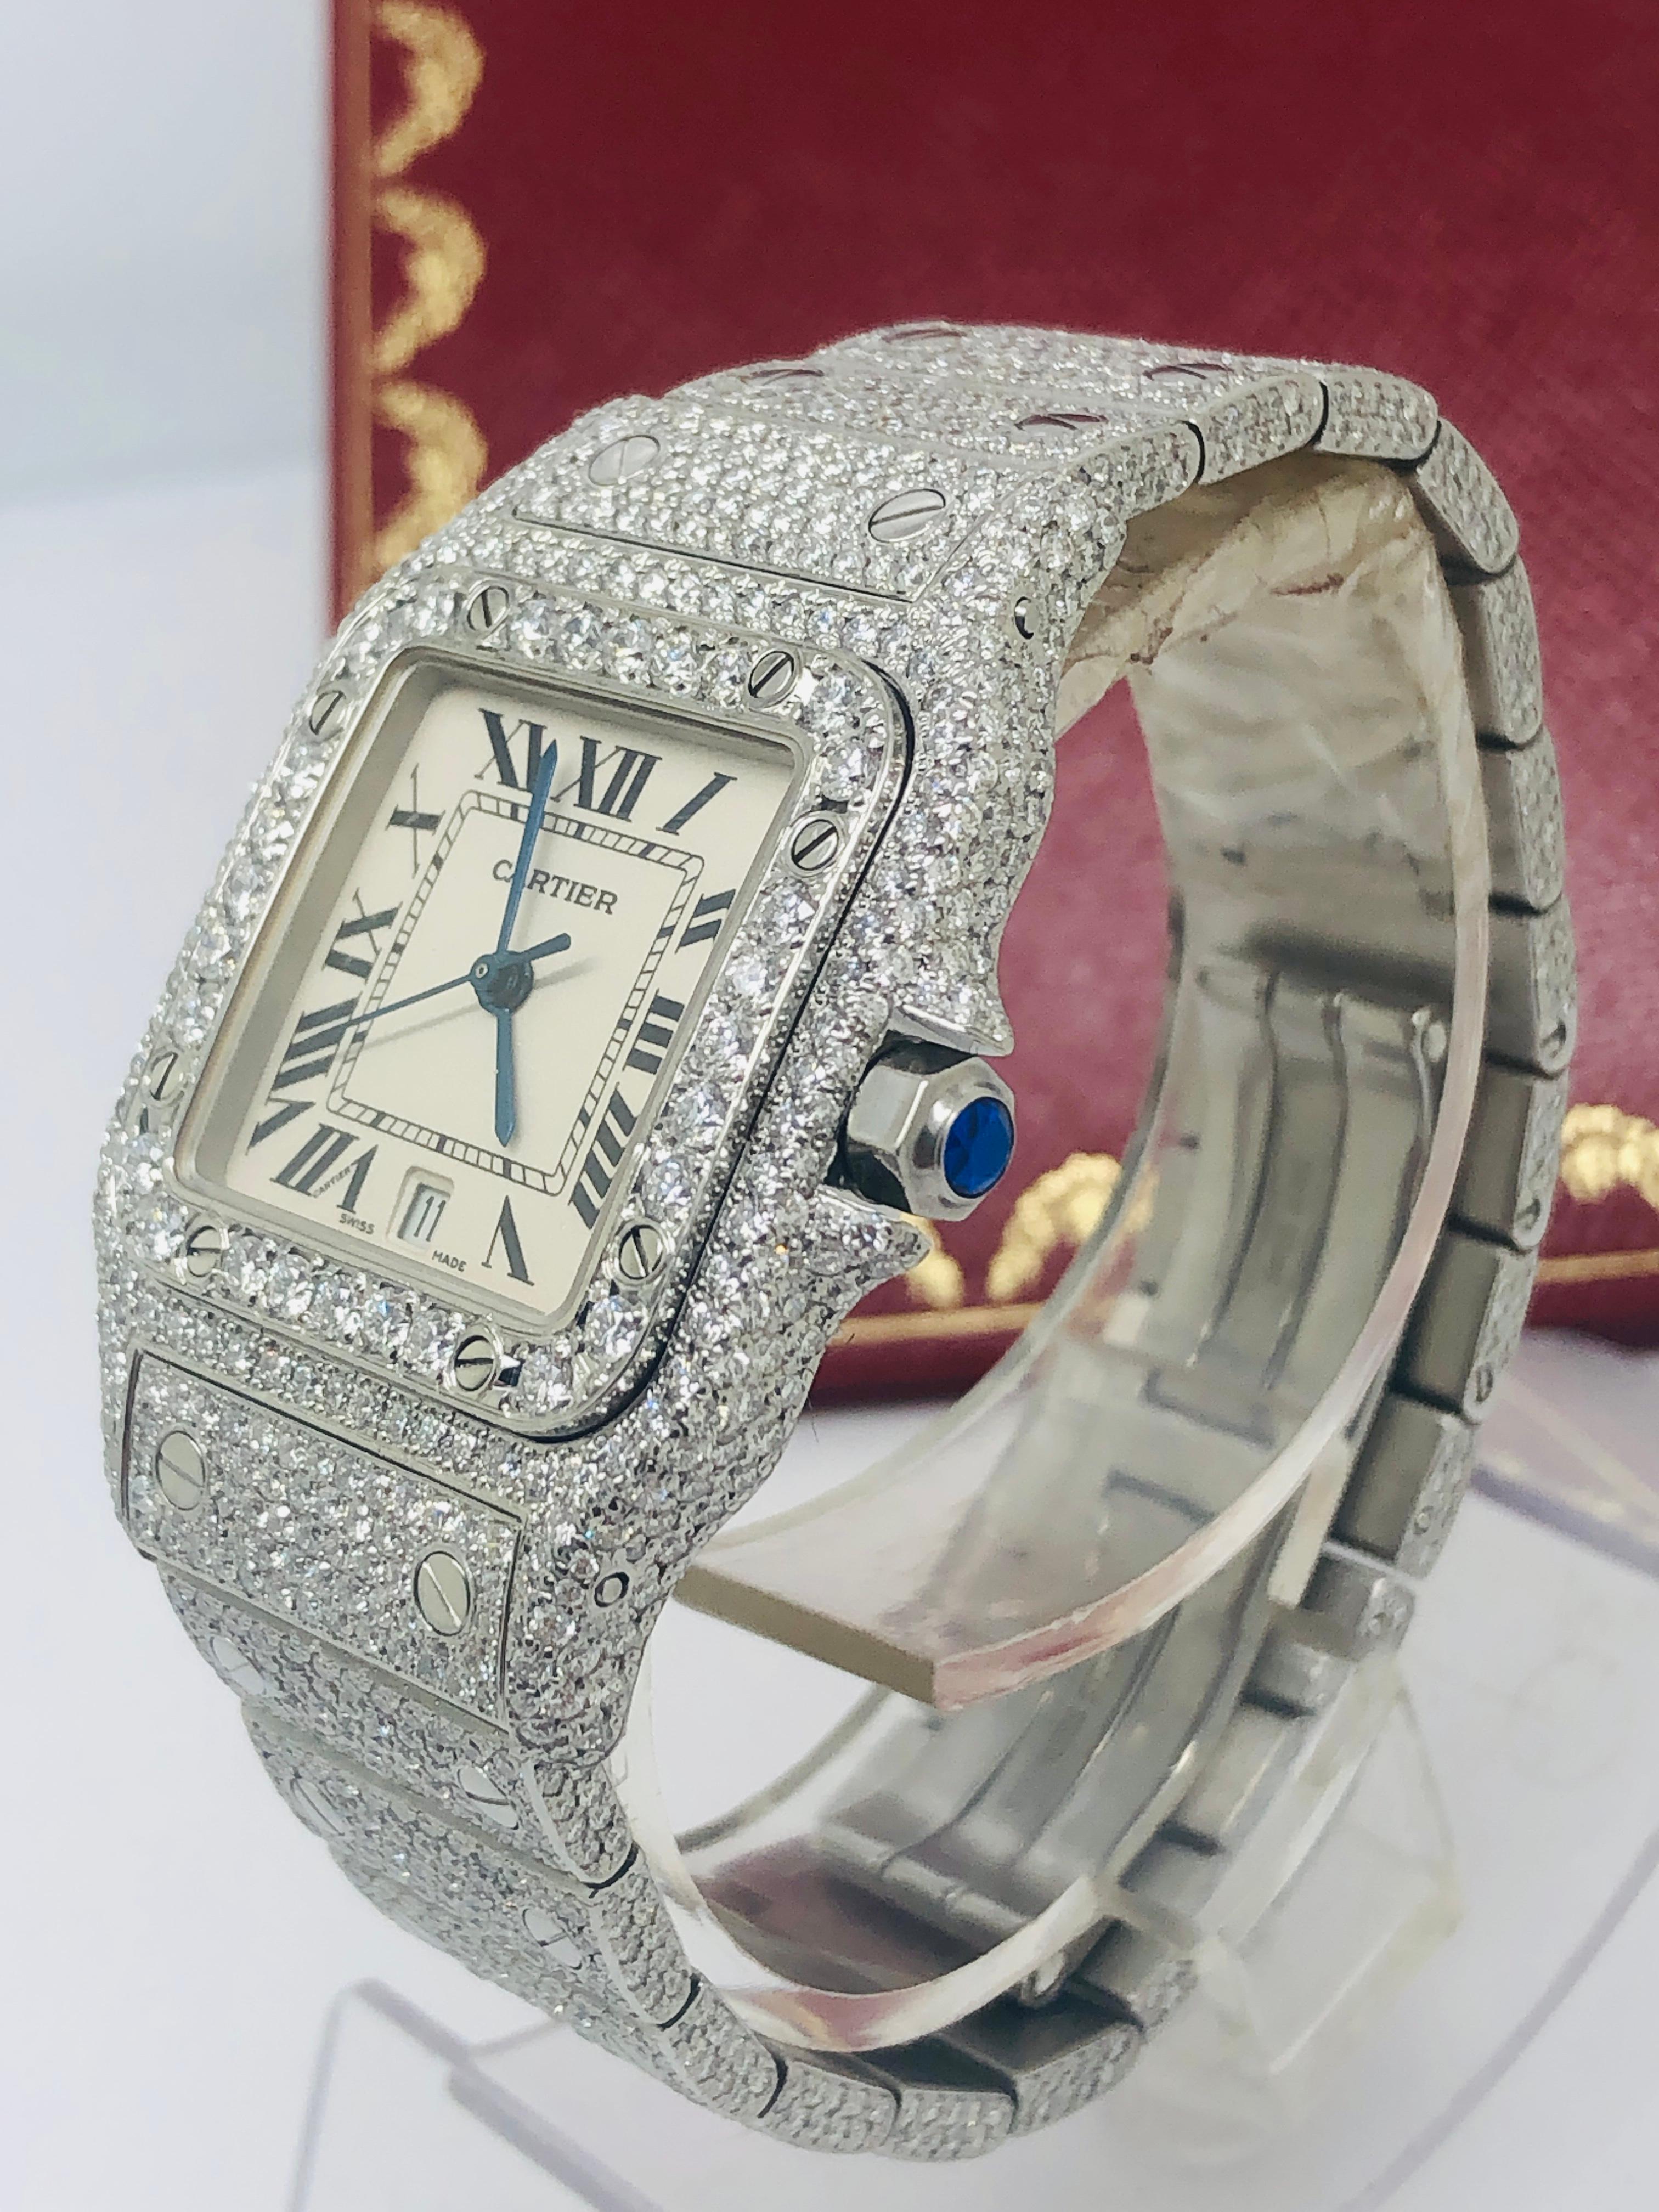 Cartier Santos Midsize unisex watch 29mm
!! WE HAVE EXTRA LINKS AVAILABLE!! 
15 Carats F VVS Diamonds
 White Roman Dial Watch

very high quality diamonds and labor were put in this all original 100% Cartier Watch

buy with confidence were are the